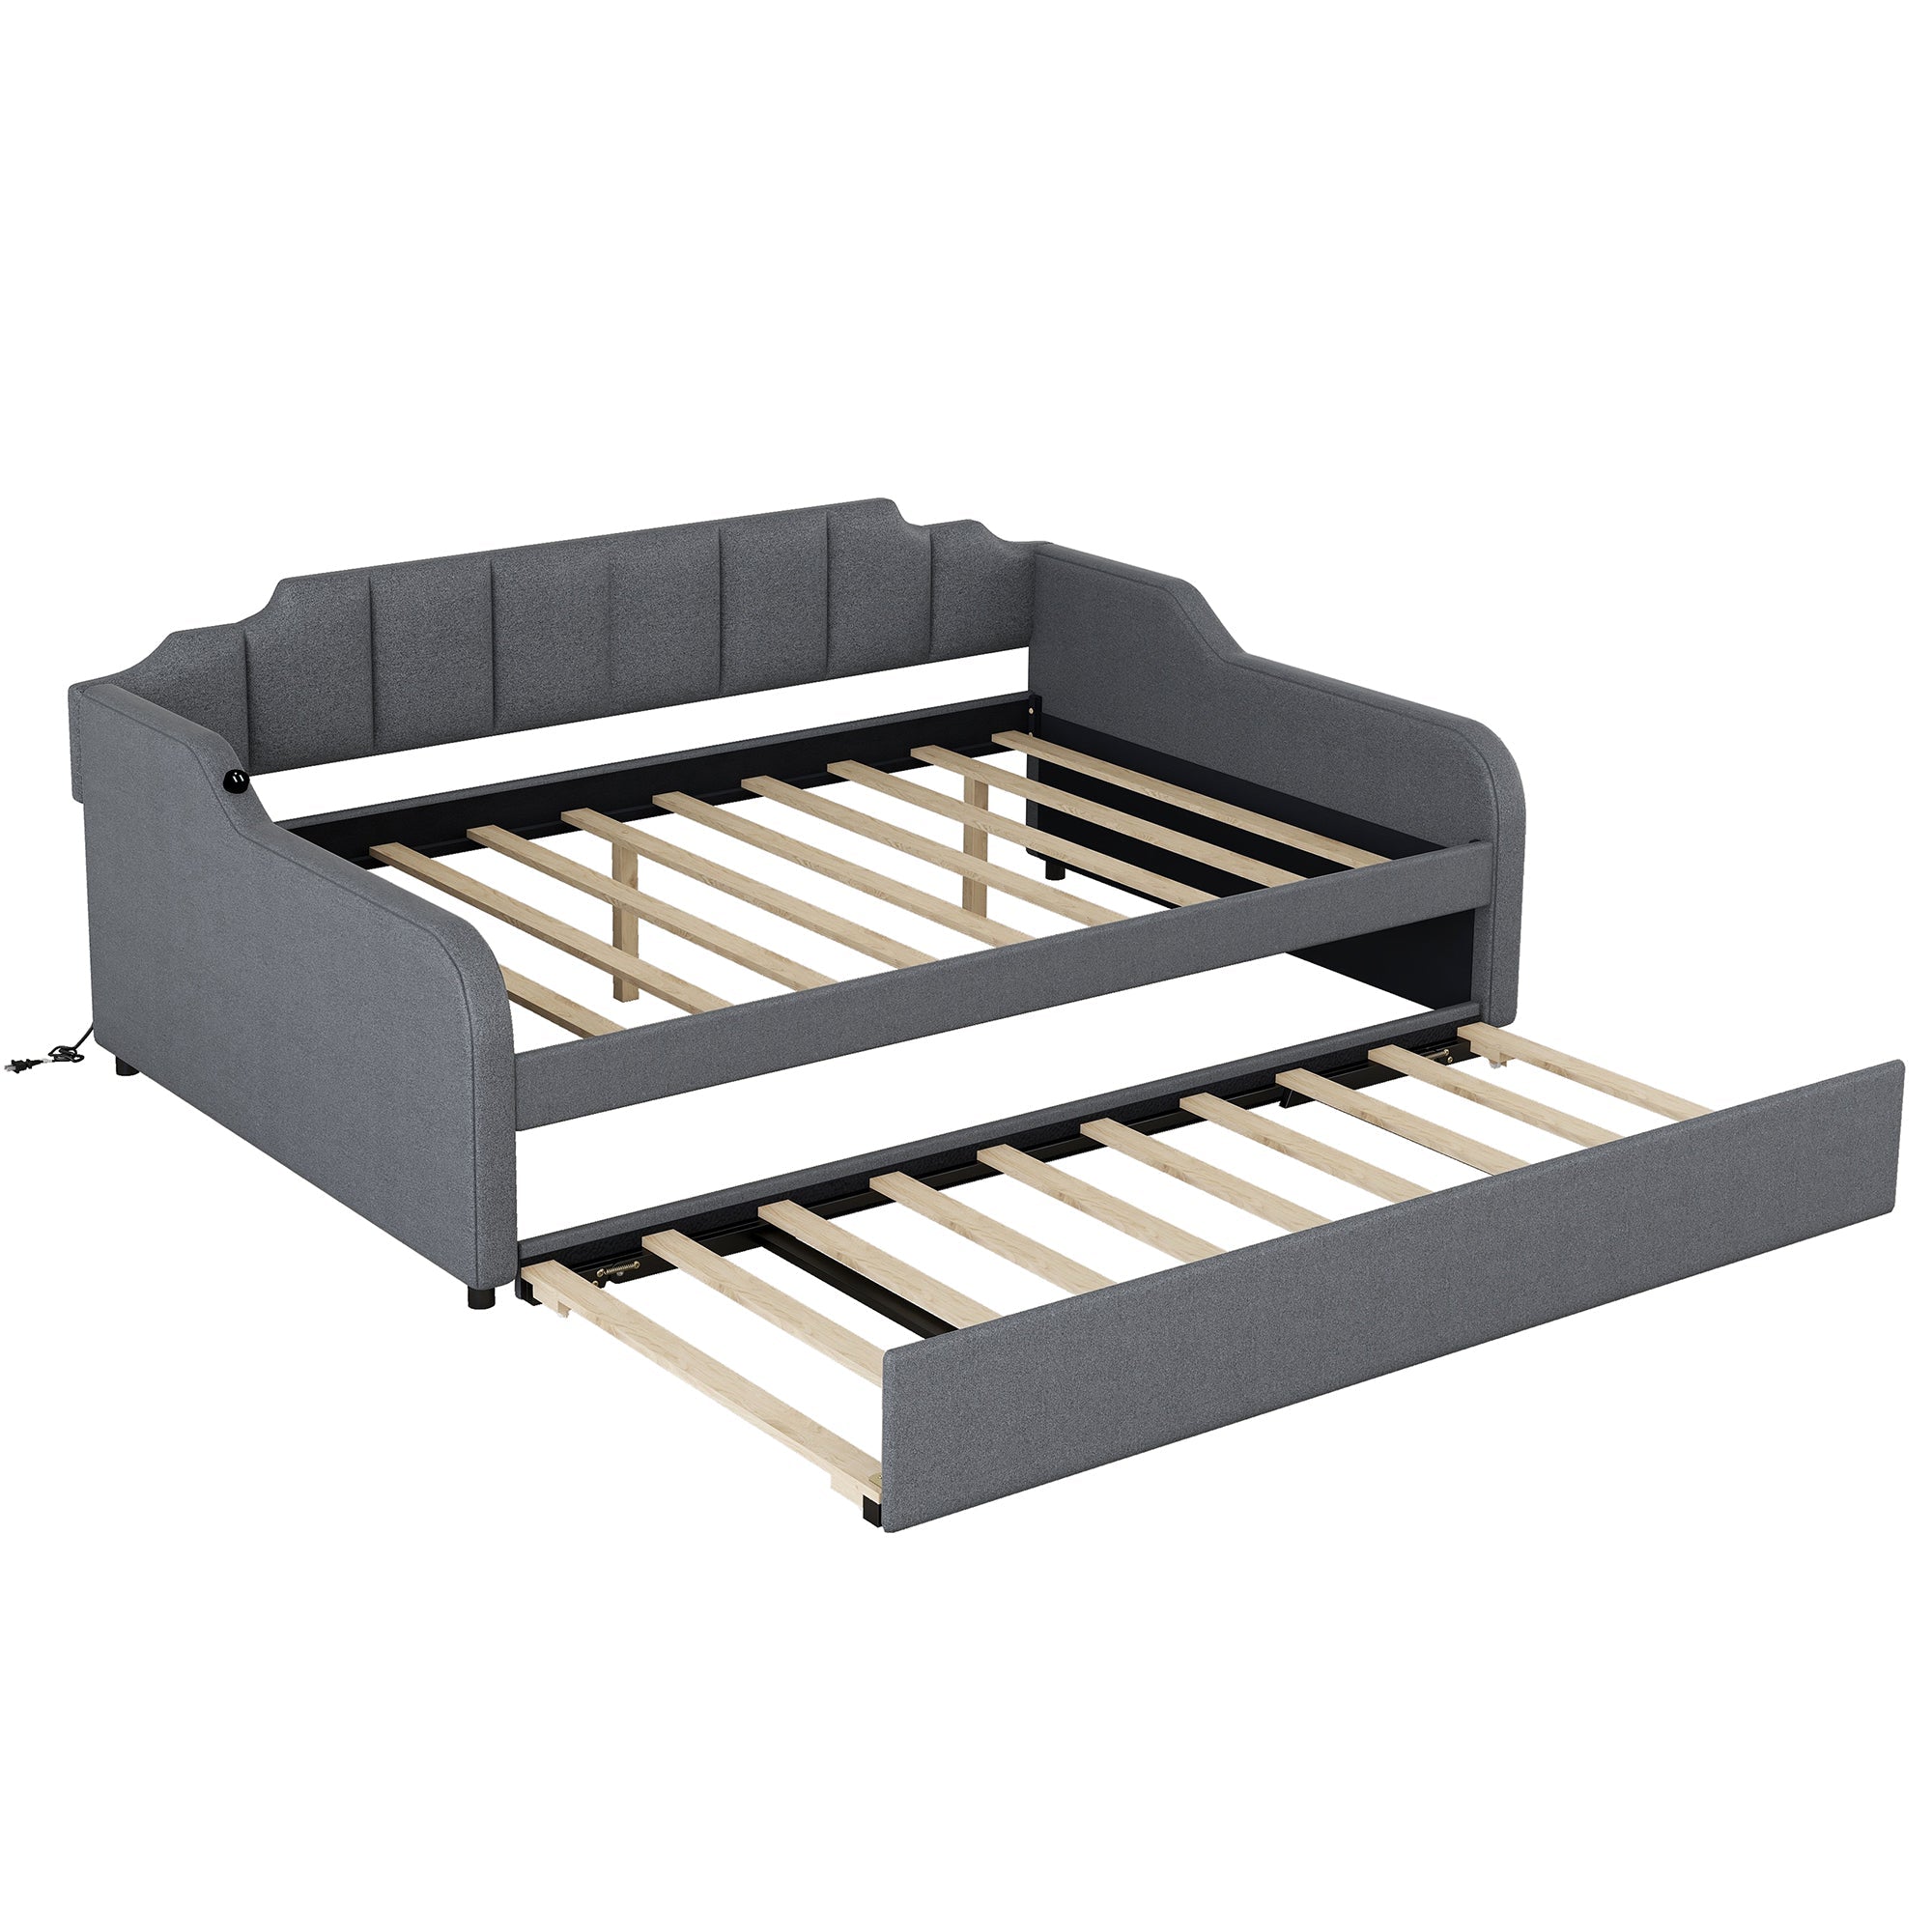 Bellemave Full Size Upholstery Daybed with Trundle and USB Charging - Bellemave